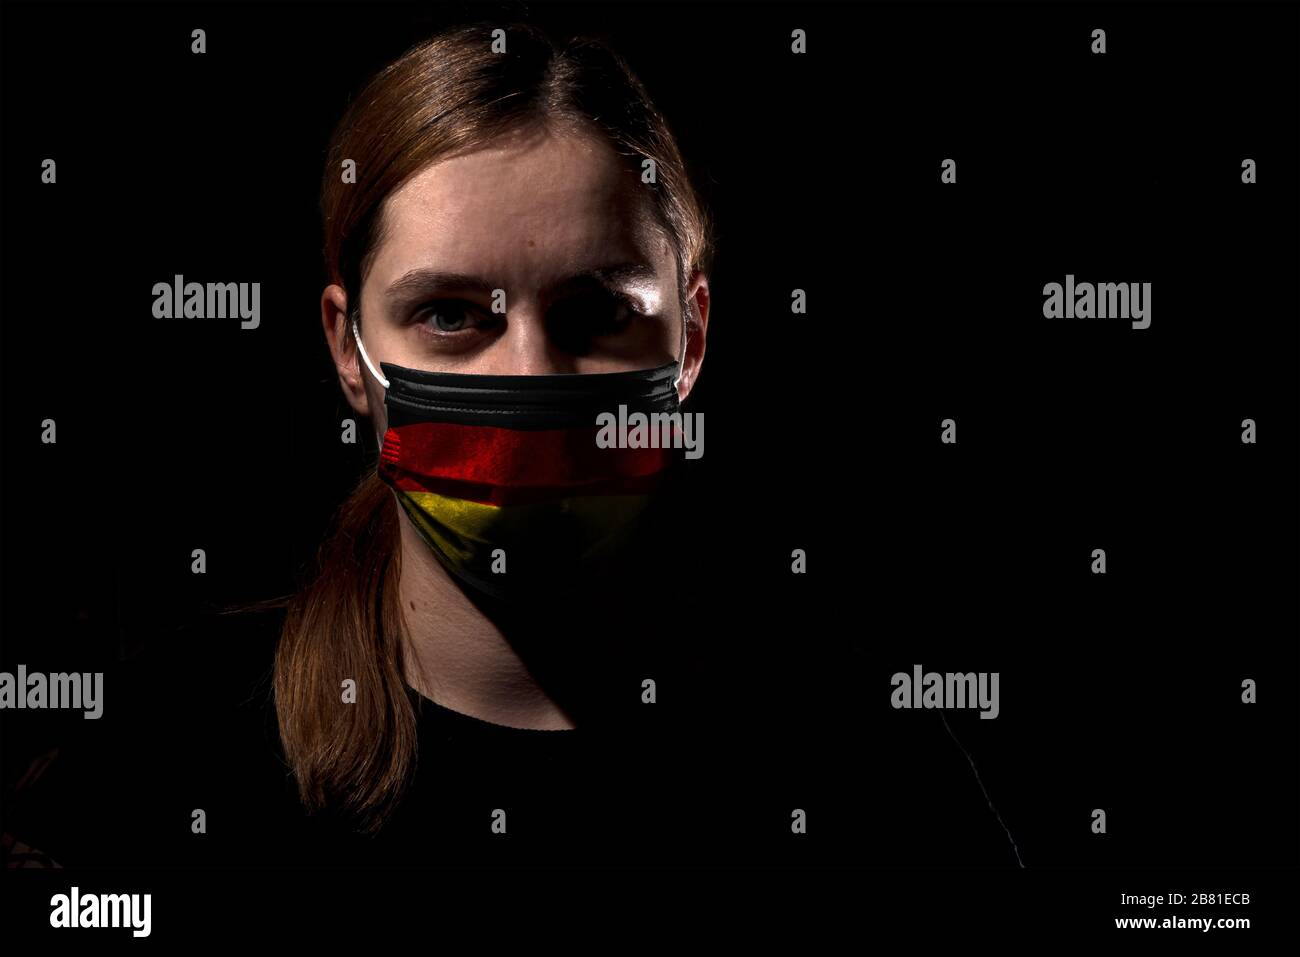 Woman wearing mask with Germany flag for protection of corona virus covid-19 SARS-CoV-2, woman with mask on black background Stock Photo